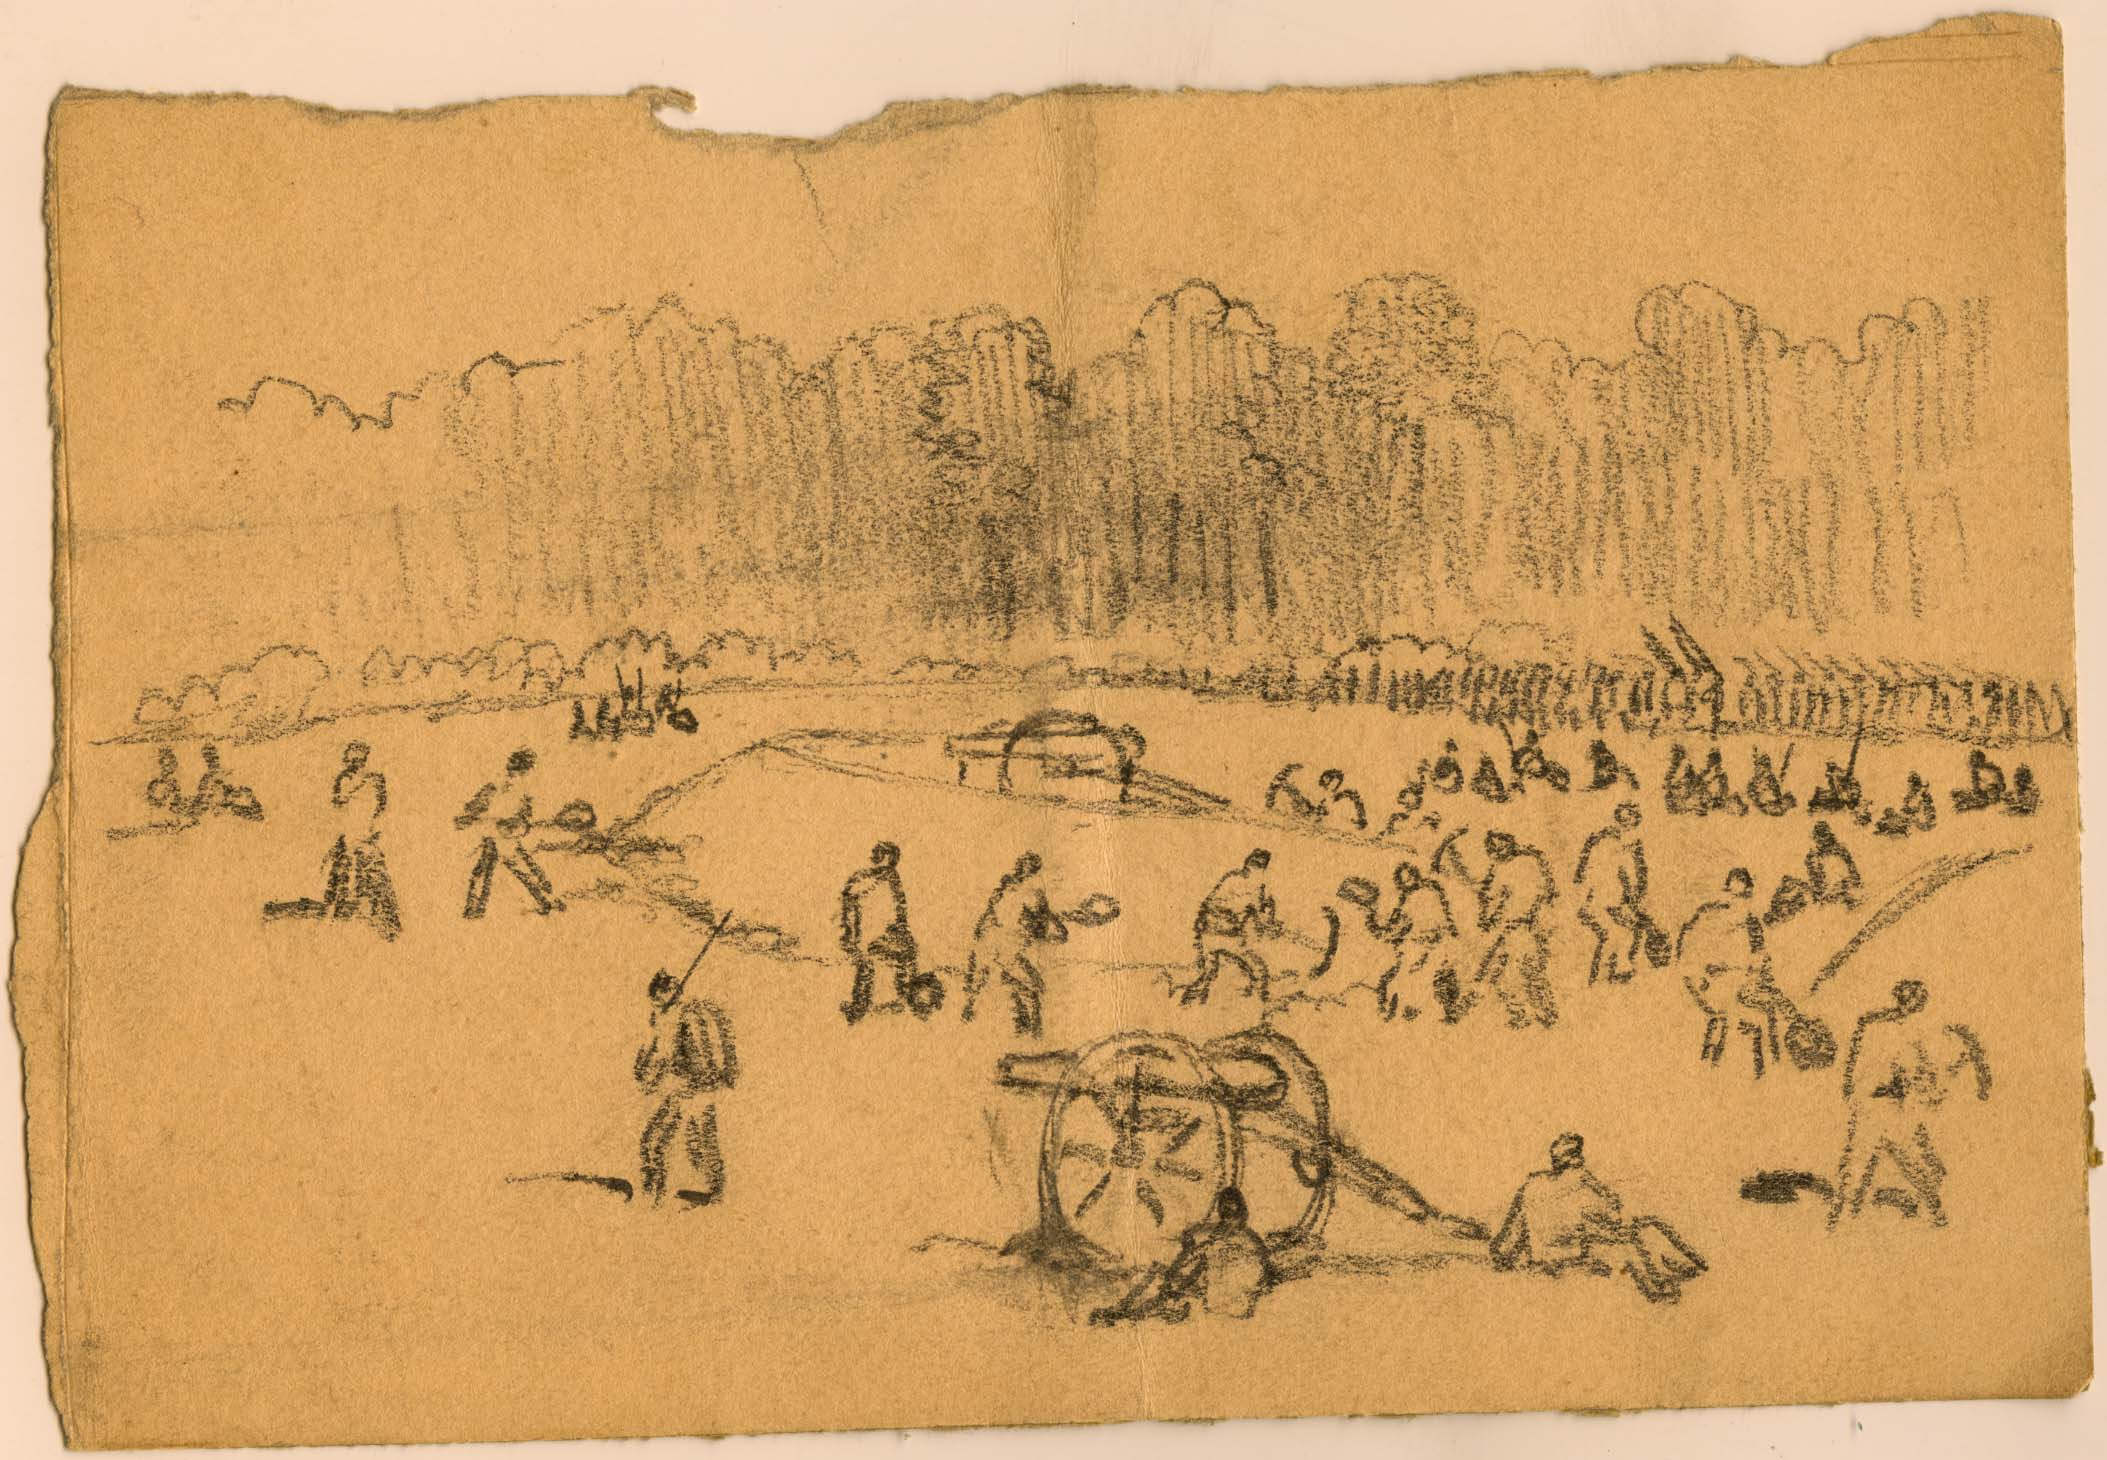 A New Home on the Web for the Becker Collection: Drawings of the American Civil War Era